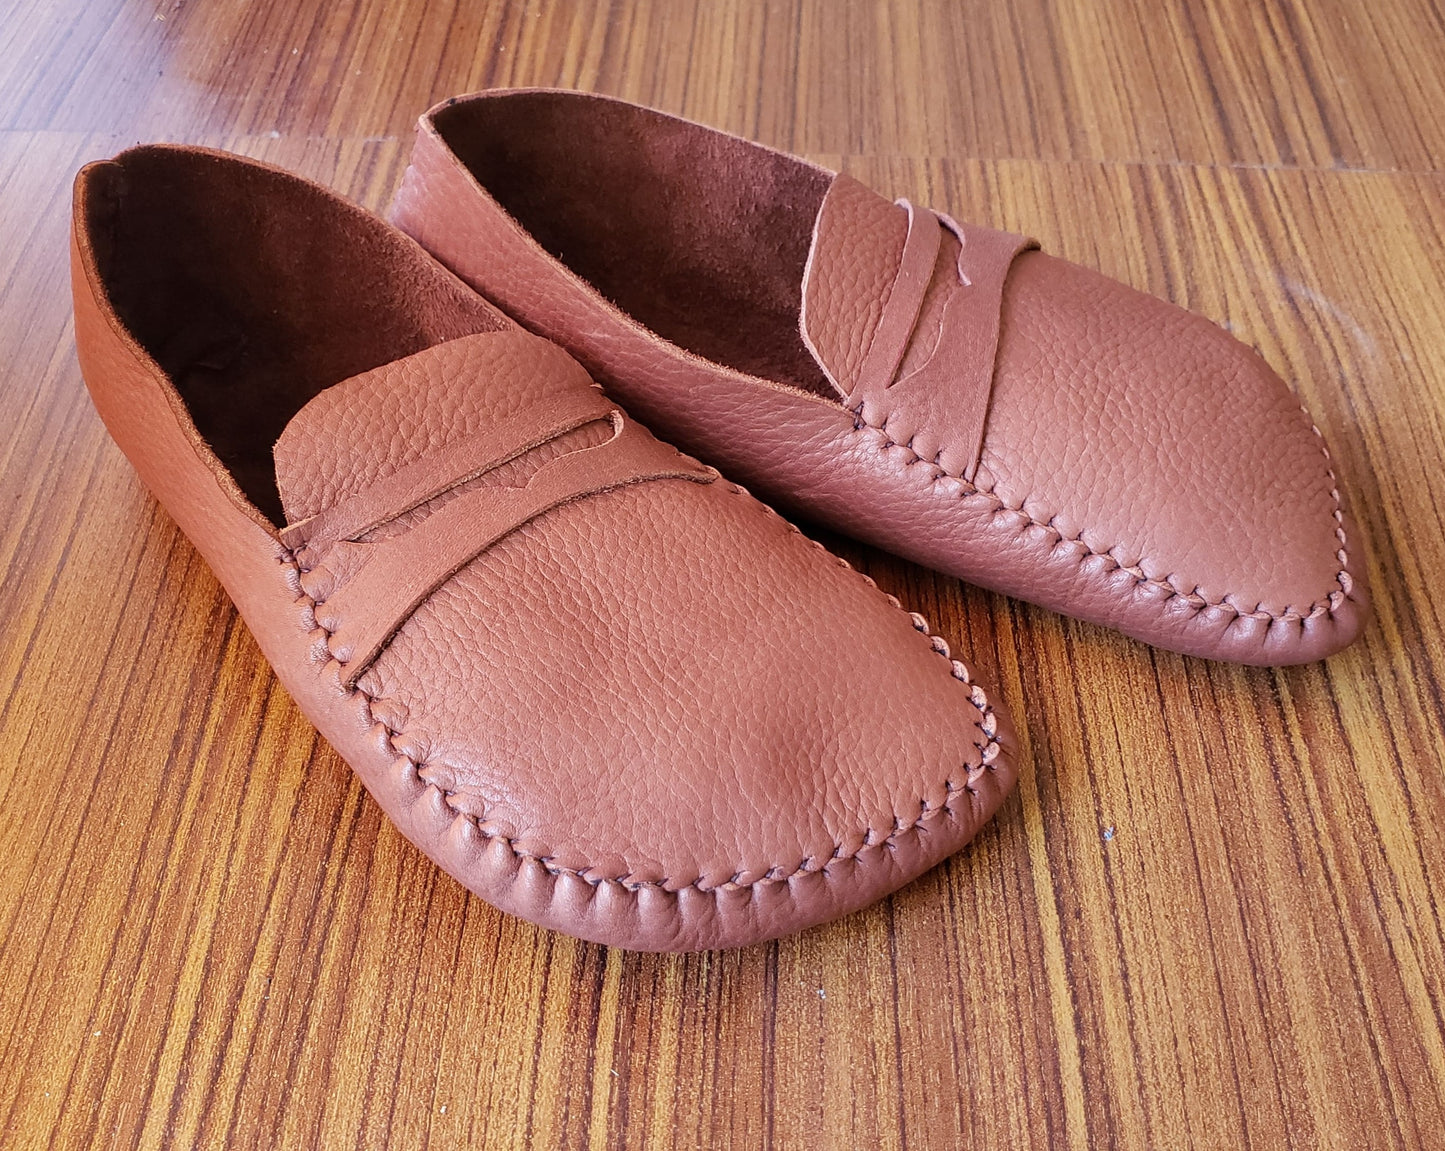 "Oxford" Moccasins / Custom-Made Barefoot-Shoes